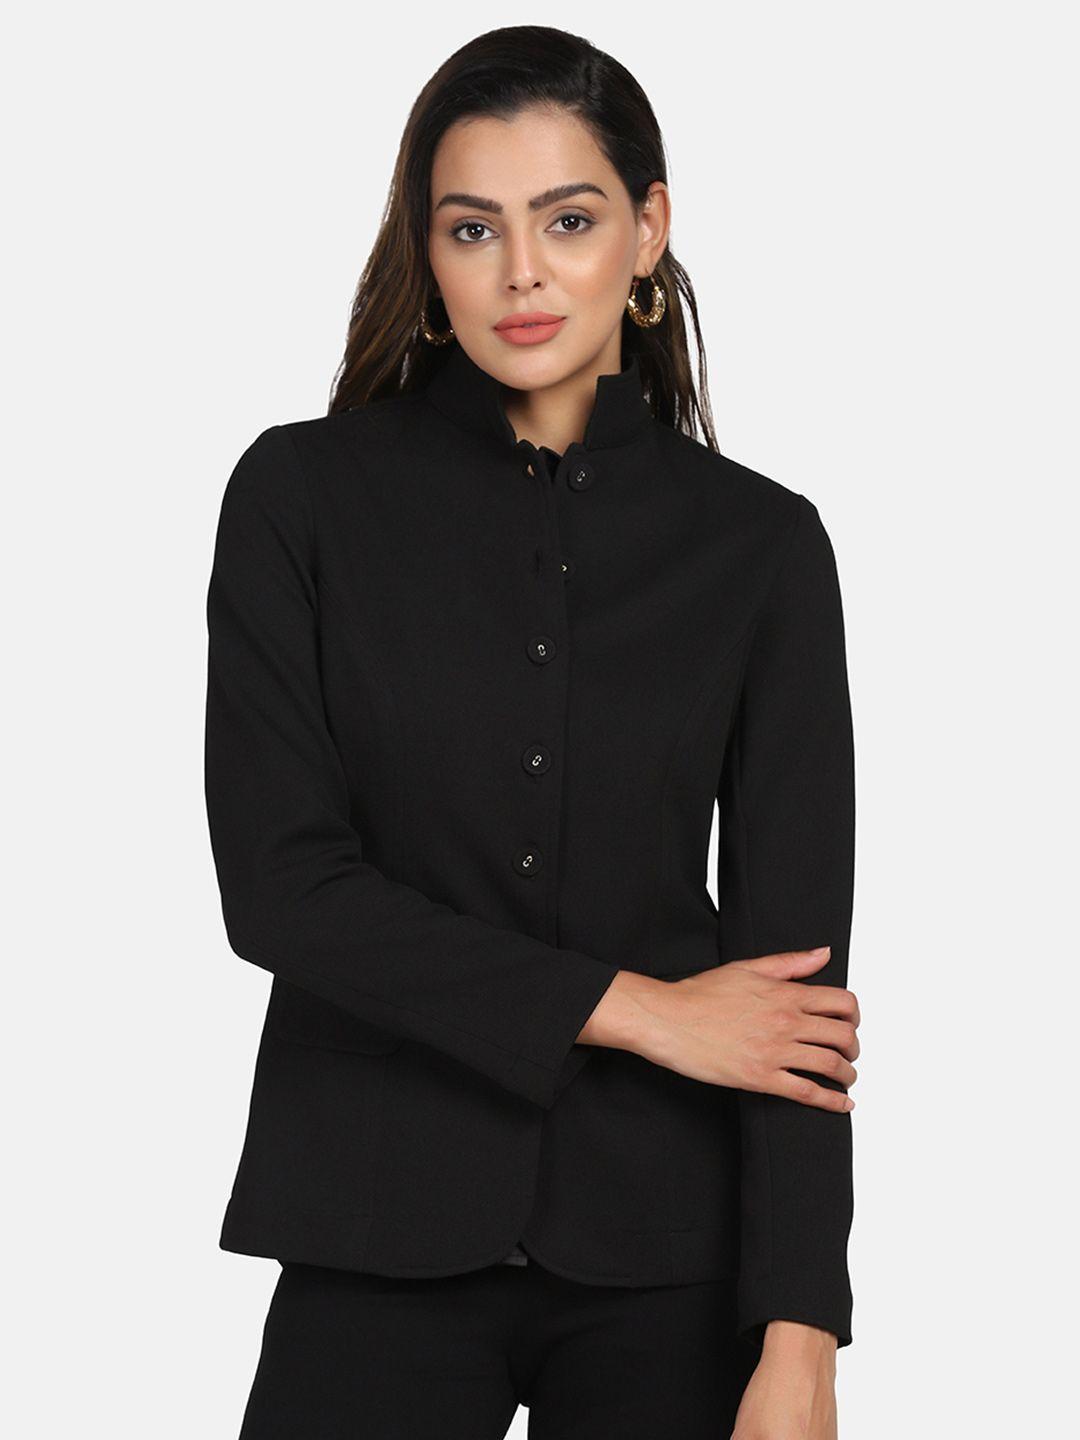 powersutra women black solid tailored jacket